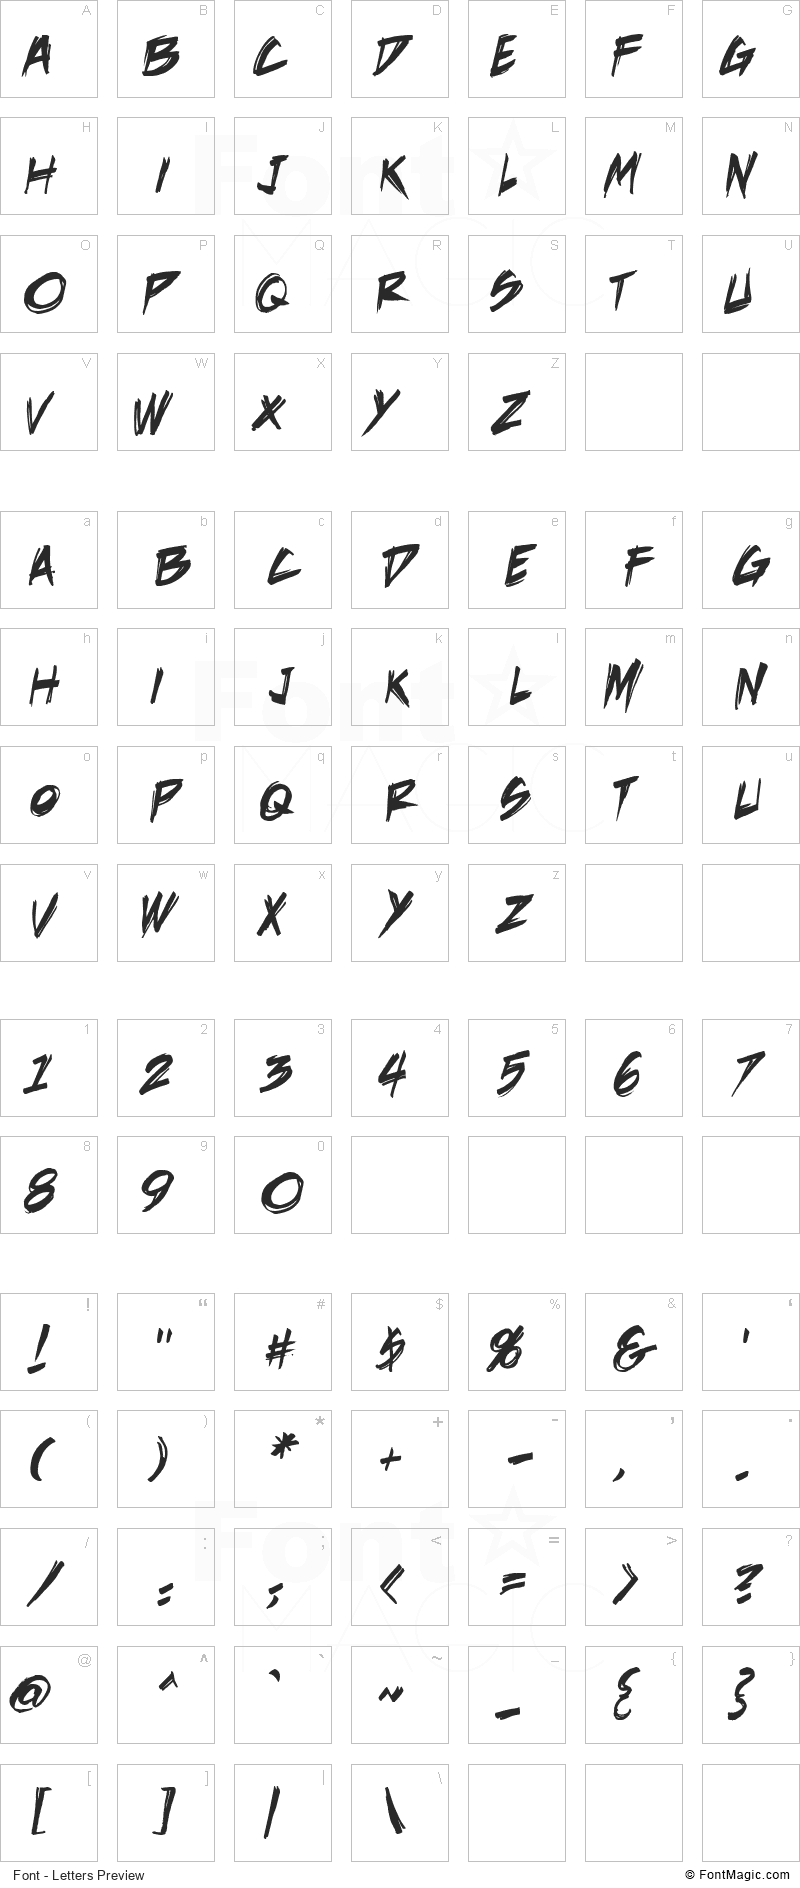 DeathRattle BB Font - All Latters Preview Chart